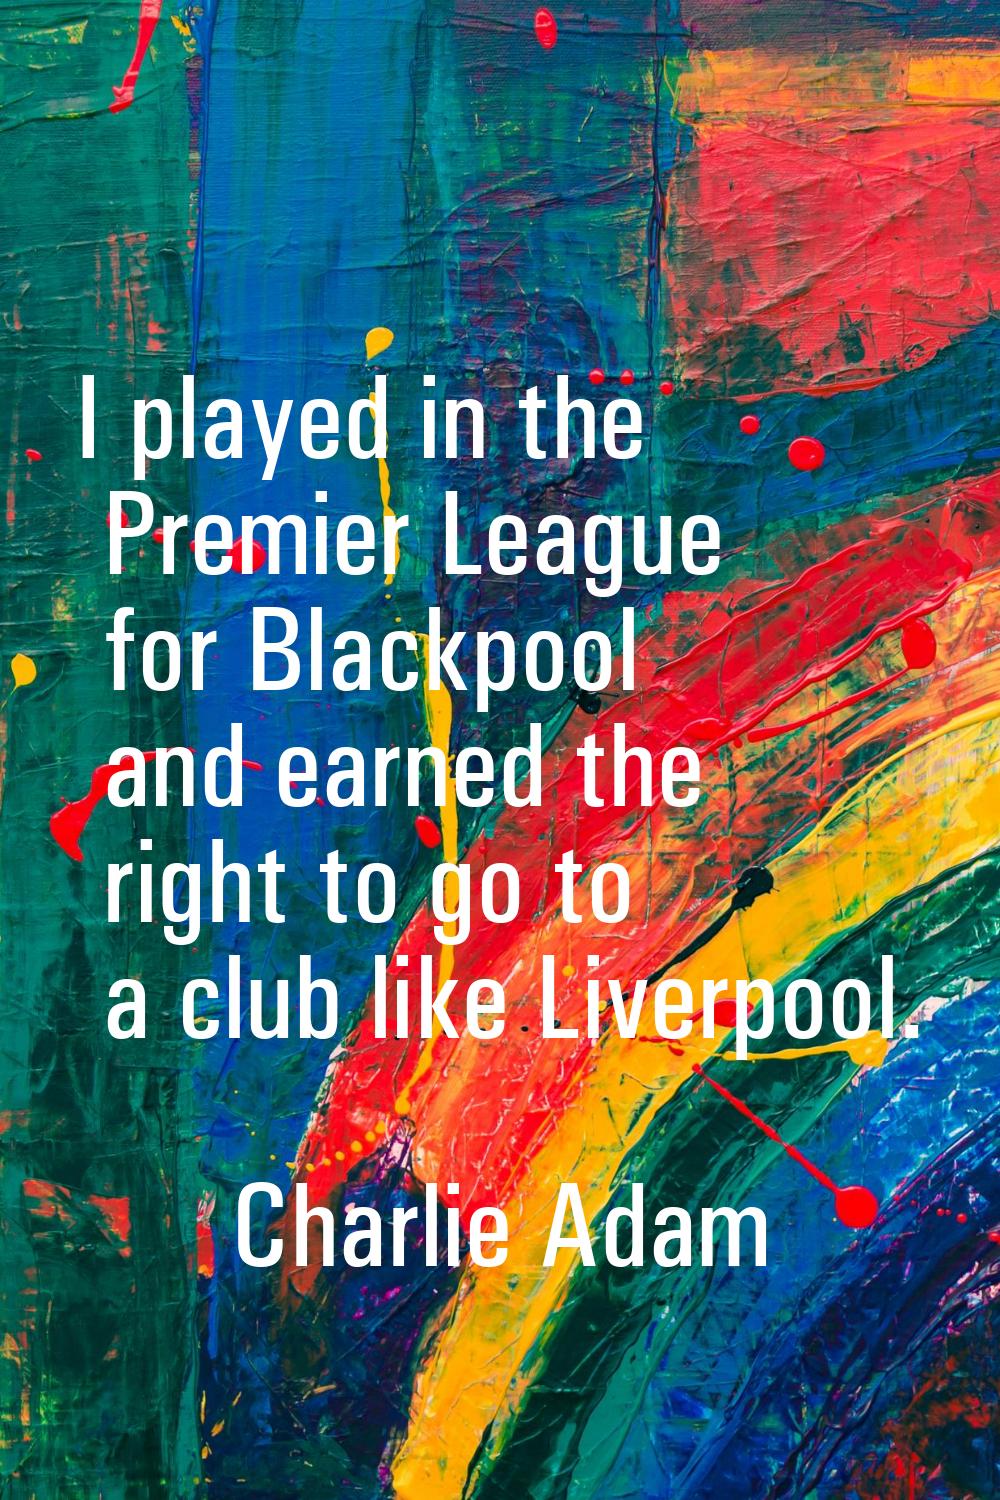 I played in the Premier League for Blackpool and earned the right to go to a club like Liverpool.